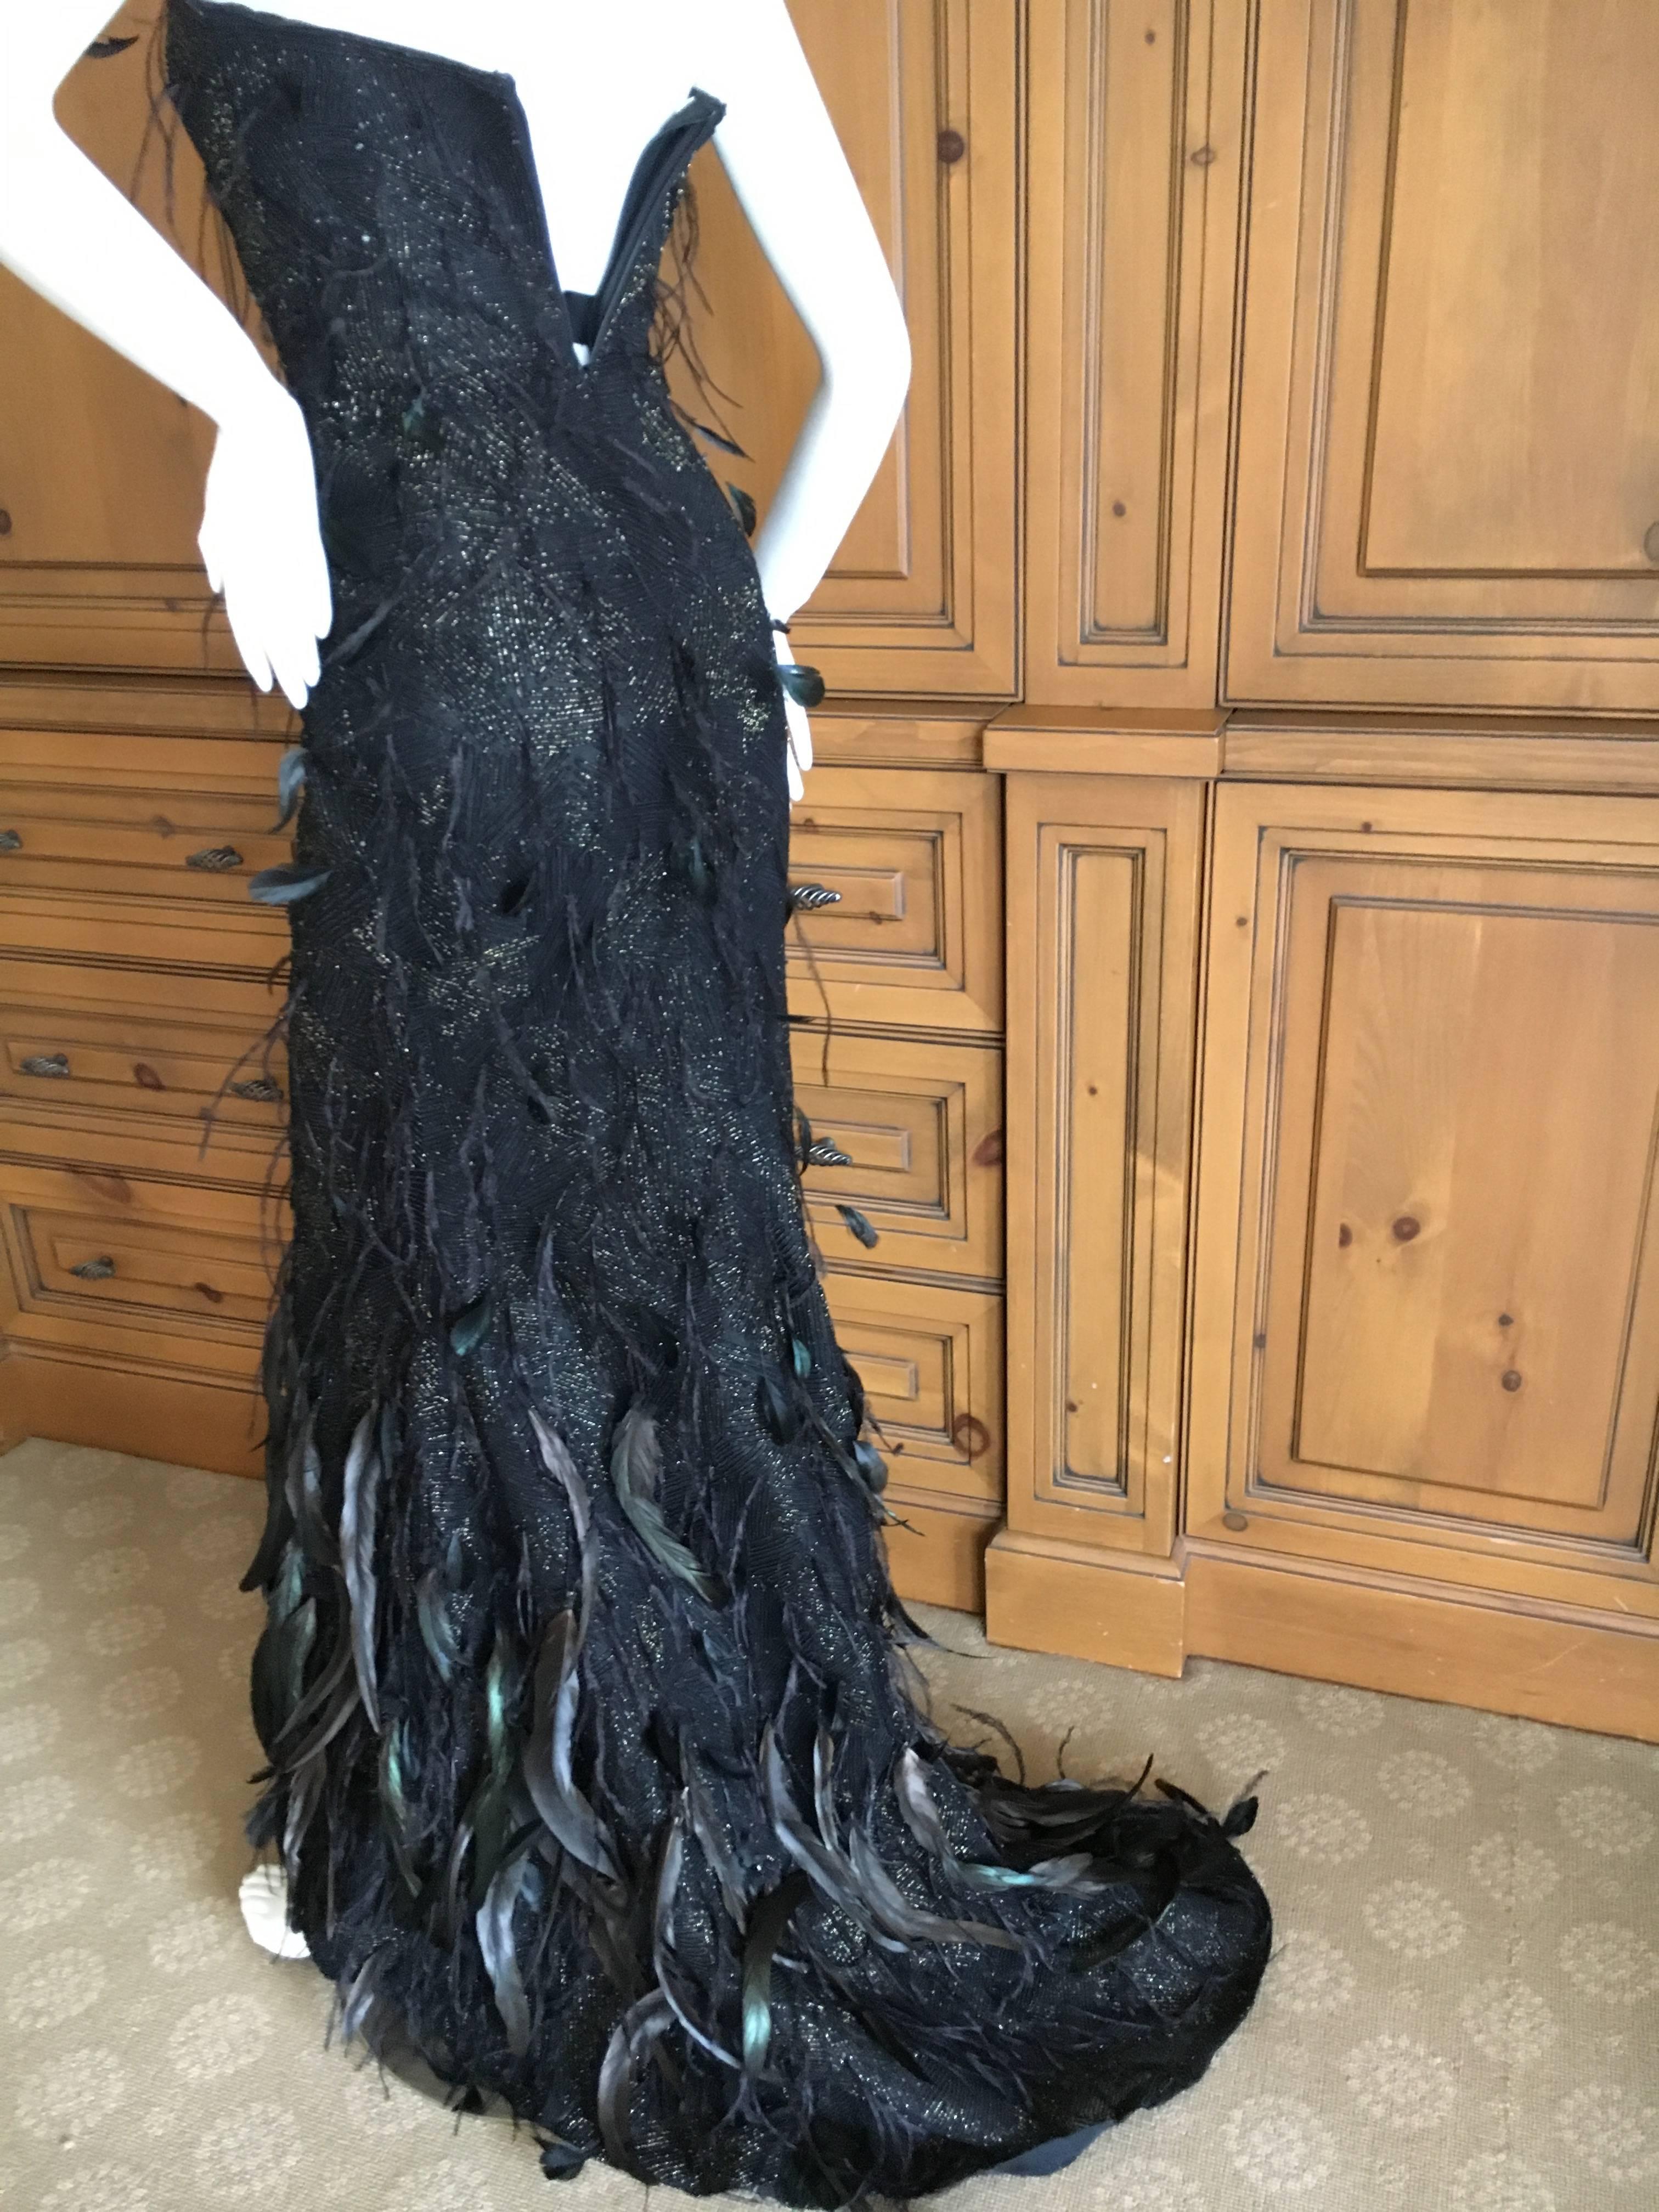 Oscar de la Renta Black and Gold Feather Trimmed Evening Gown with Train.
This is so beautiful, but hard to capture in photographs.
The fabric has gold throughout, and is embellished with feathers all over.
size 0
Bust 34"
Waist 25"
Hips